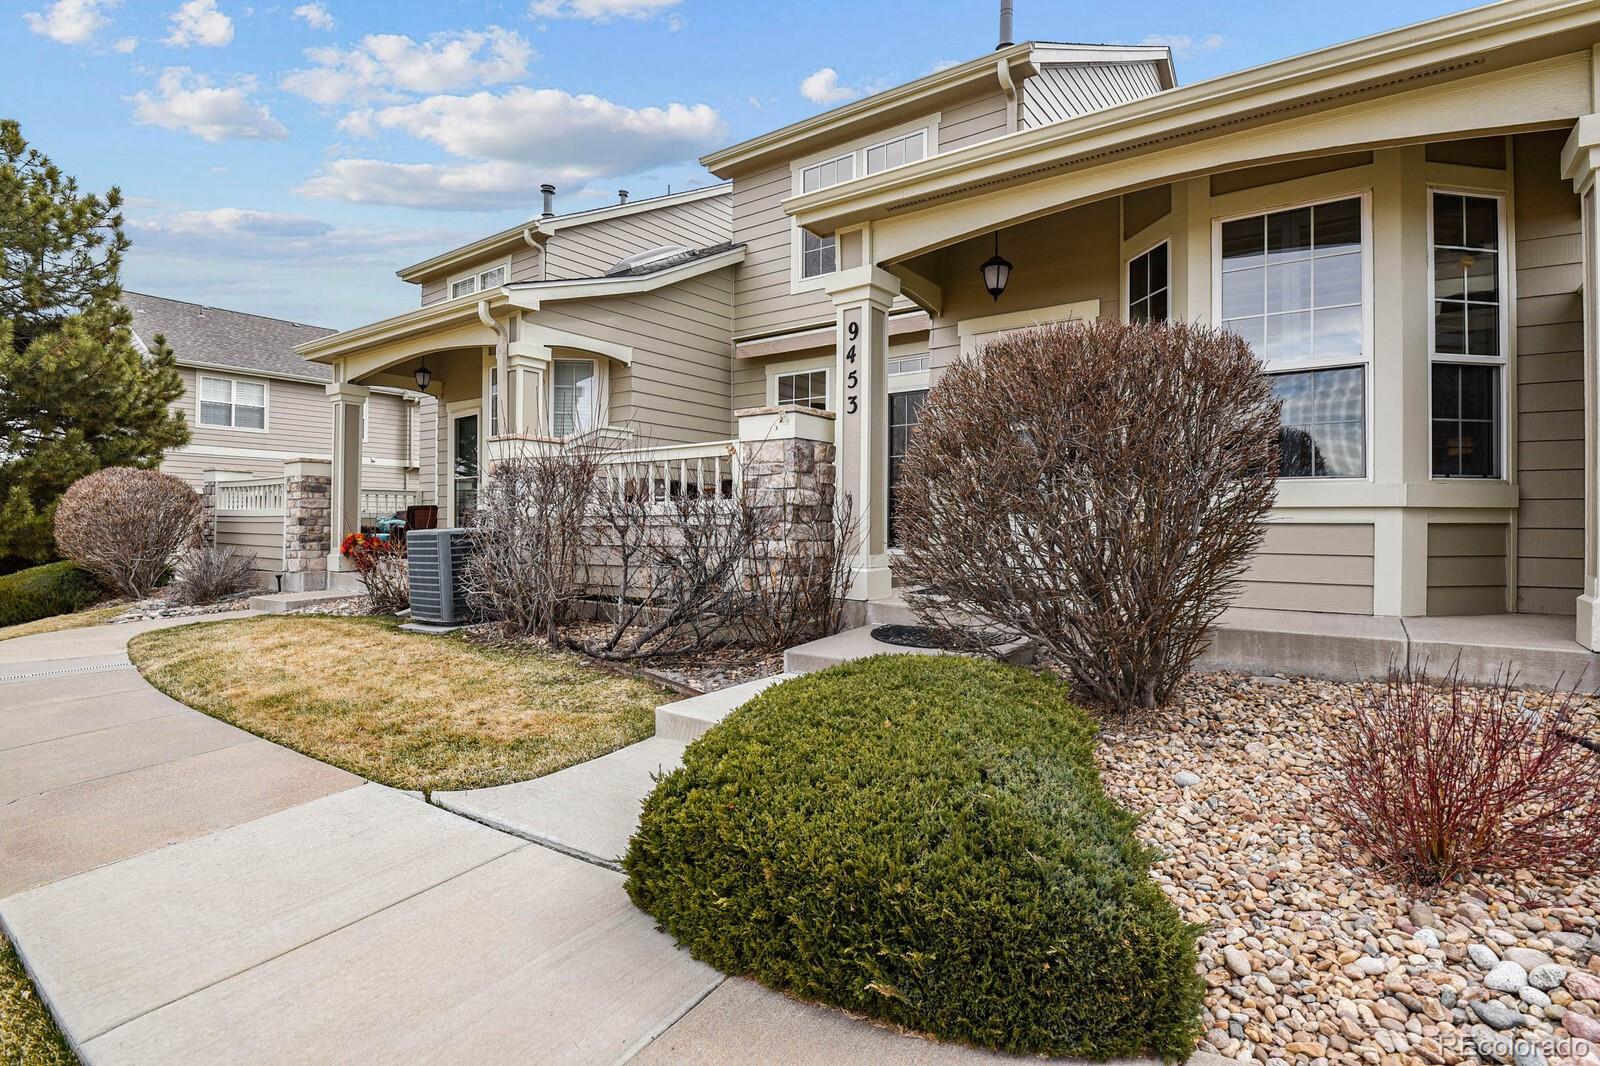 9453  crossland way, highlands ranch sold home. Closed on 2024-04-30 for $630,000.